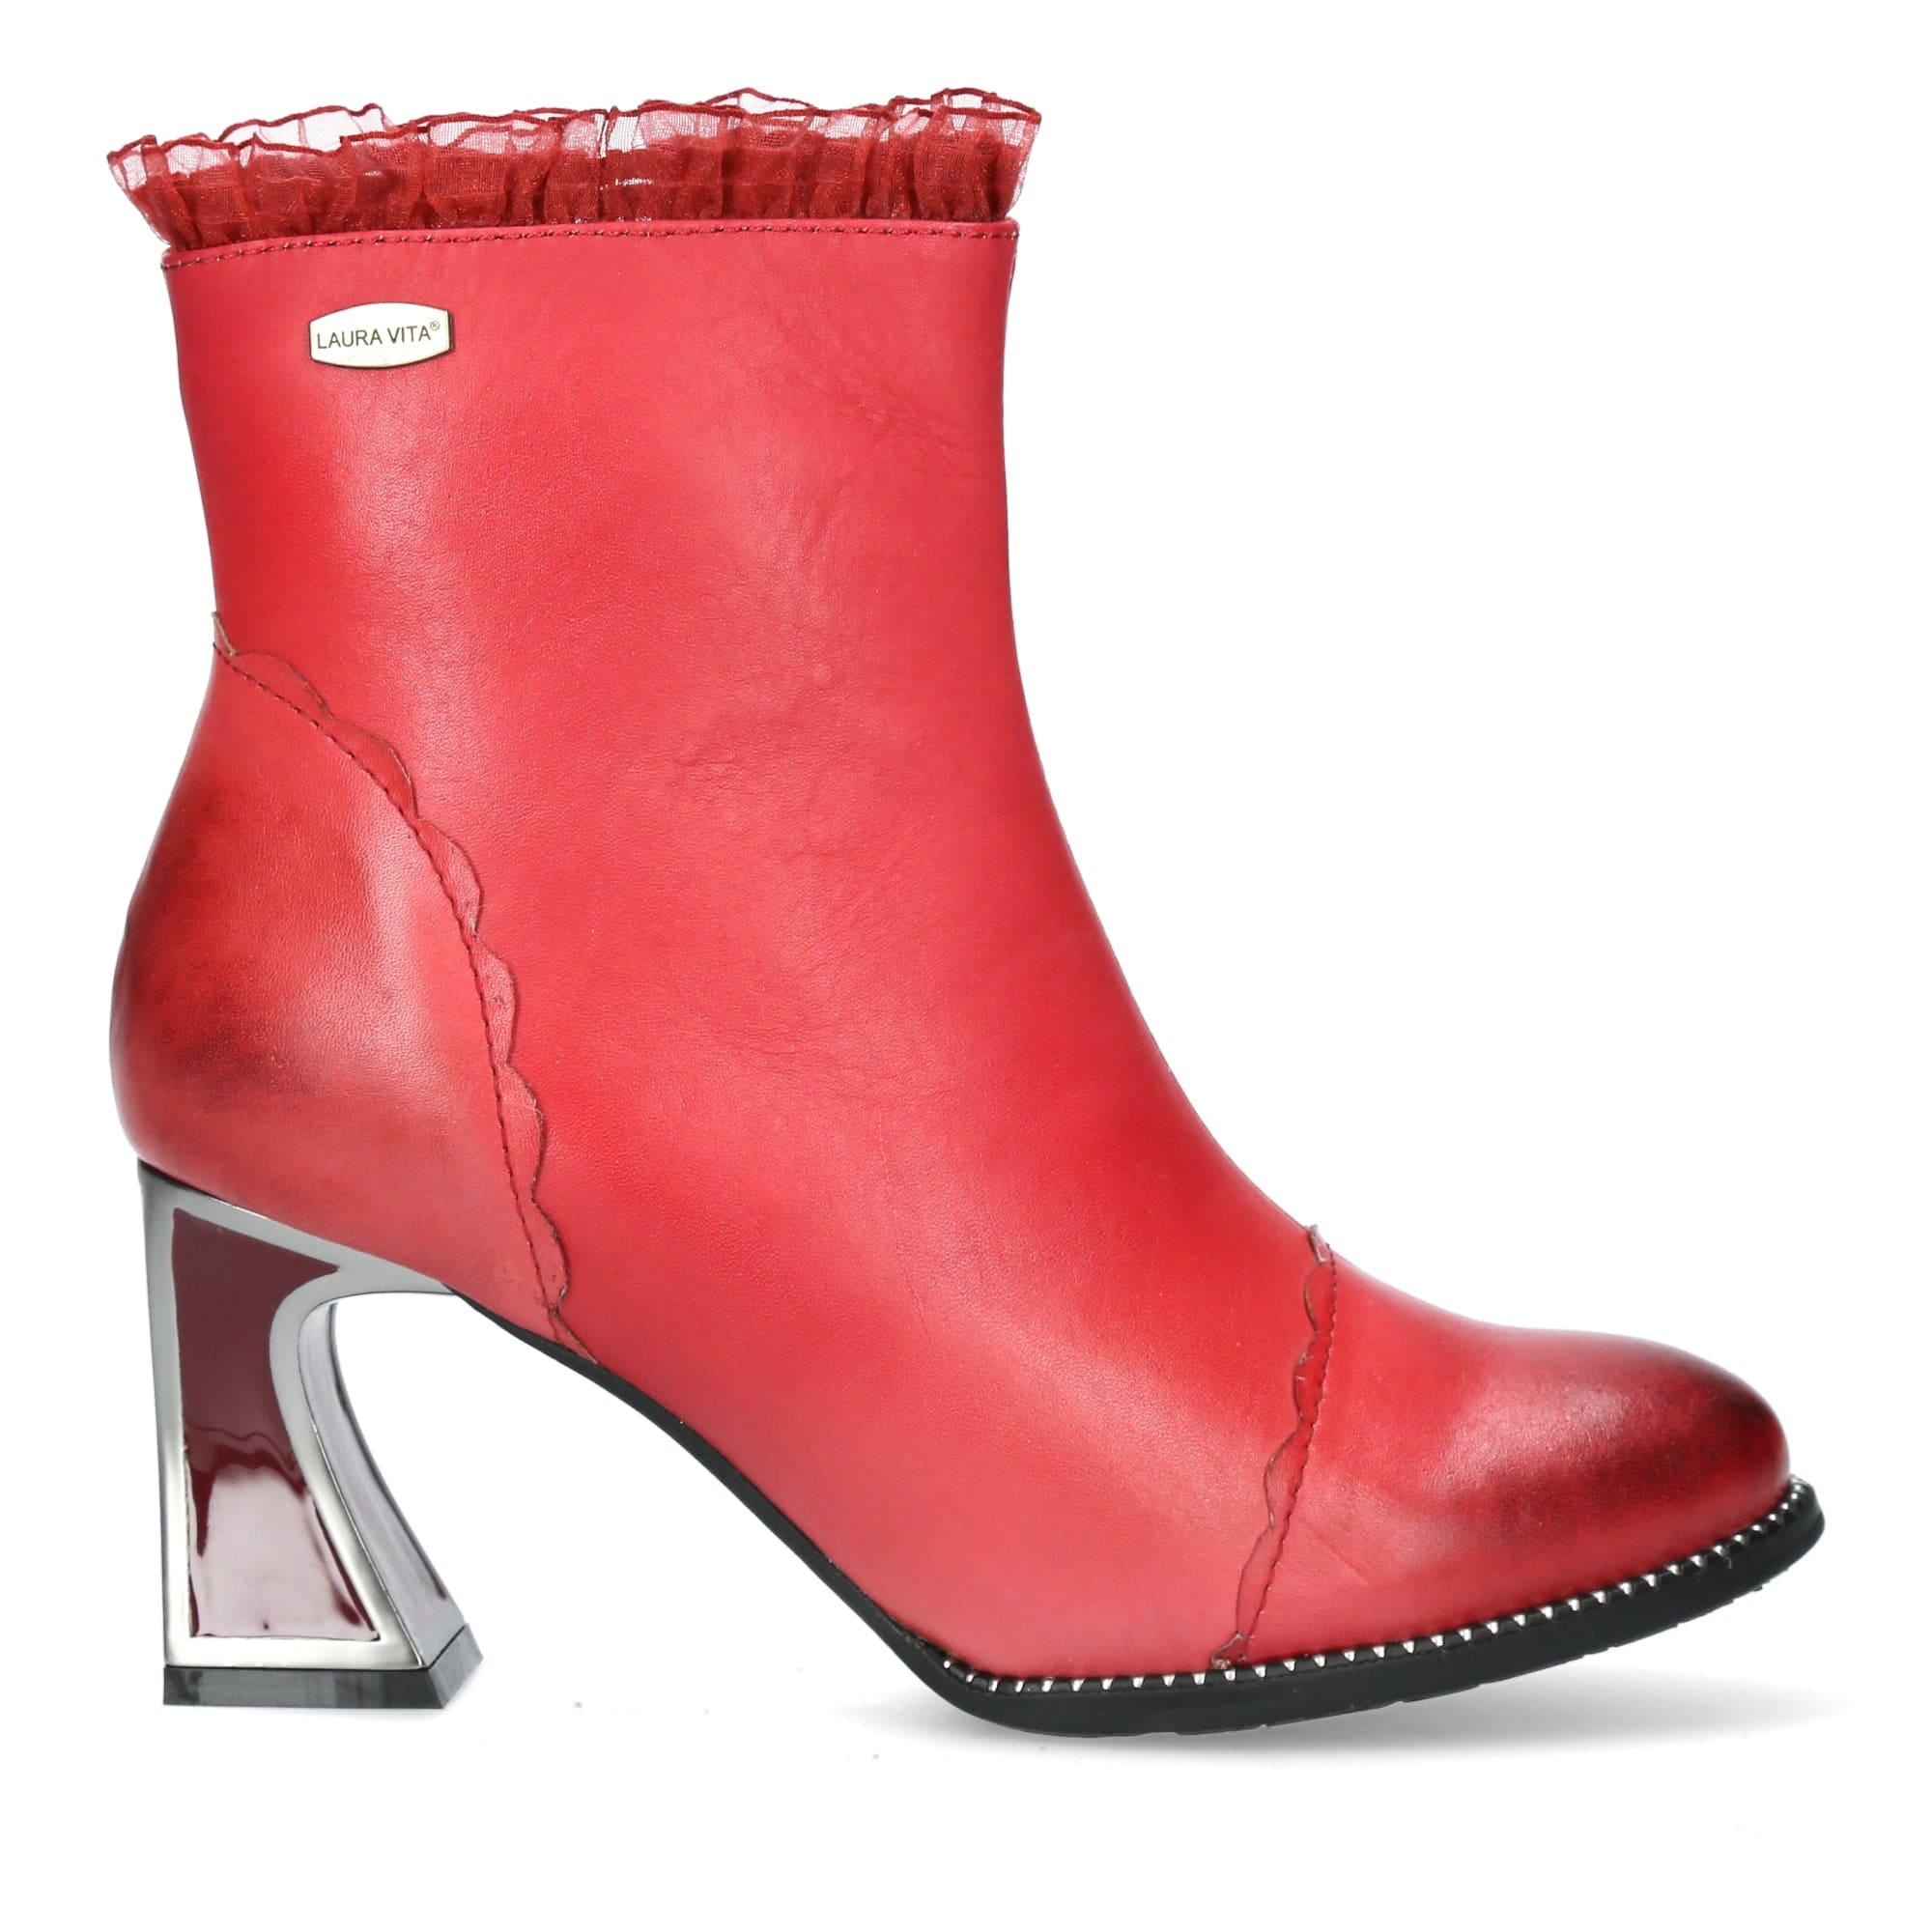 Shoes JACBO 12 - 35 / Red - Boots